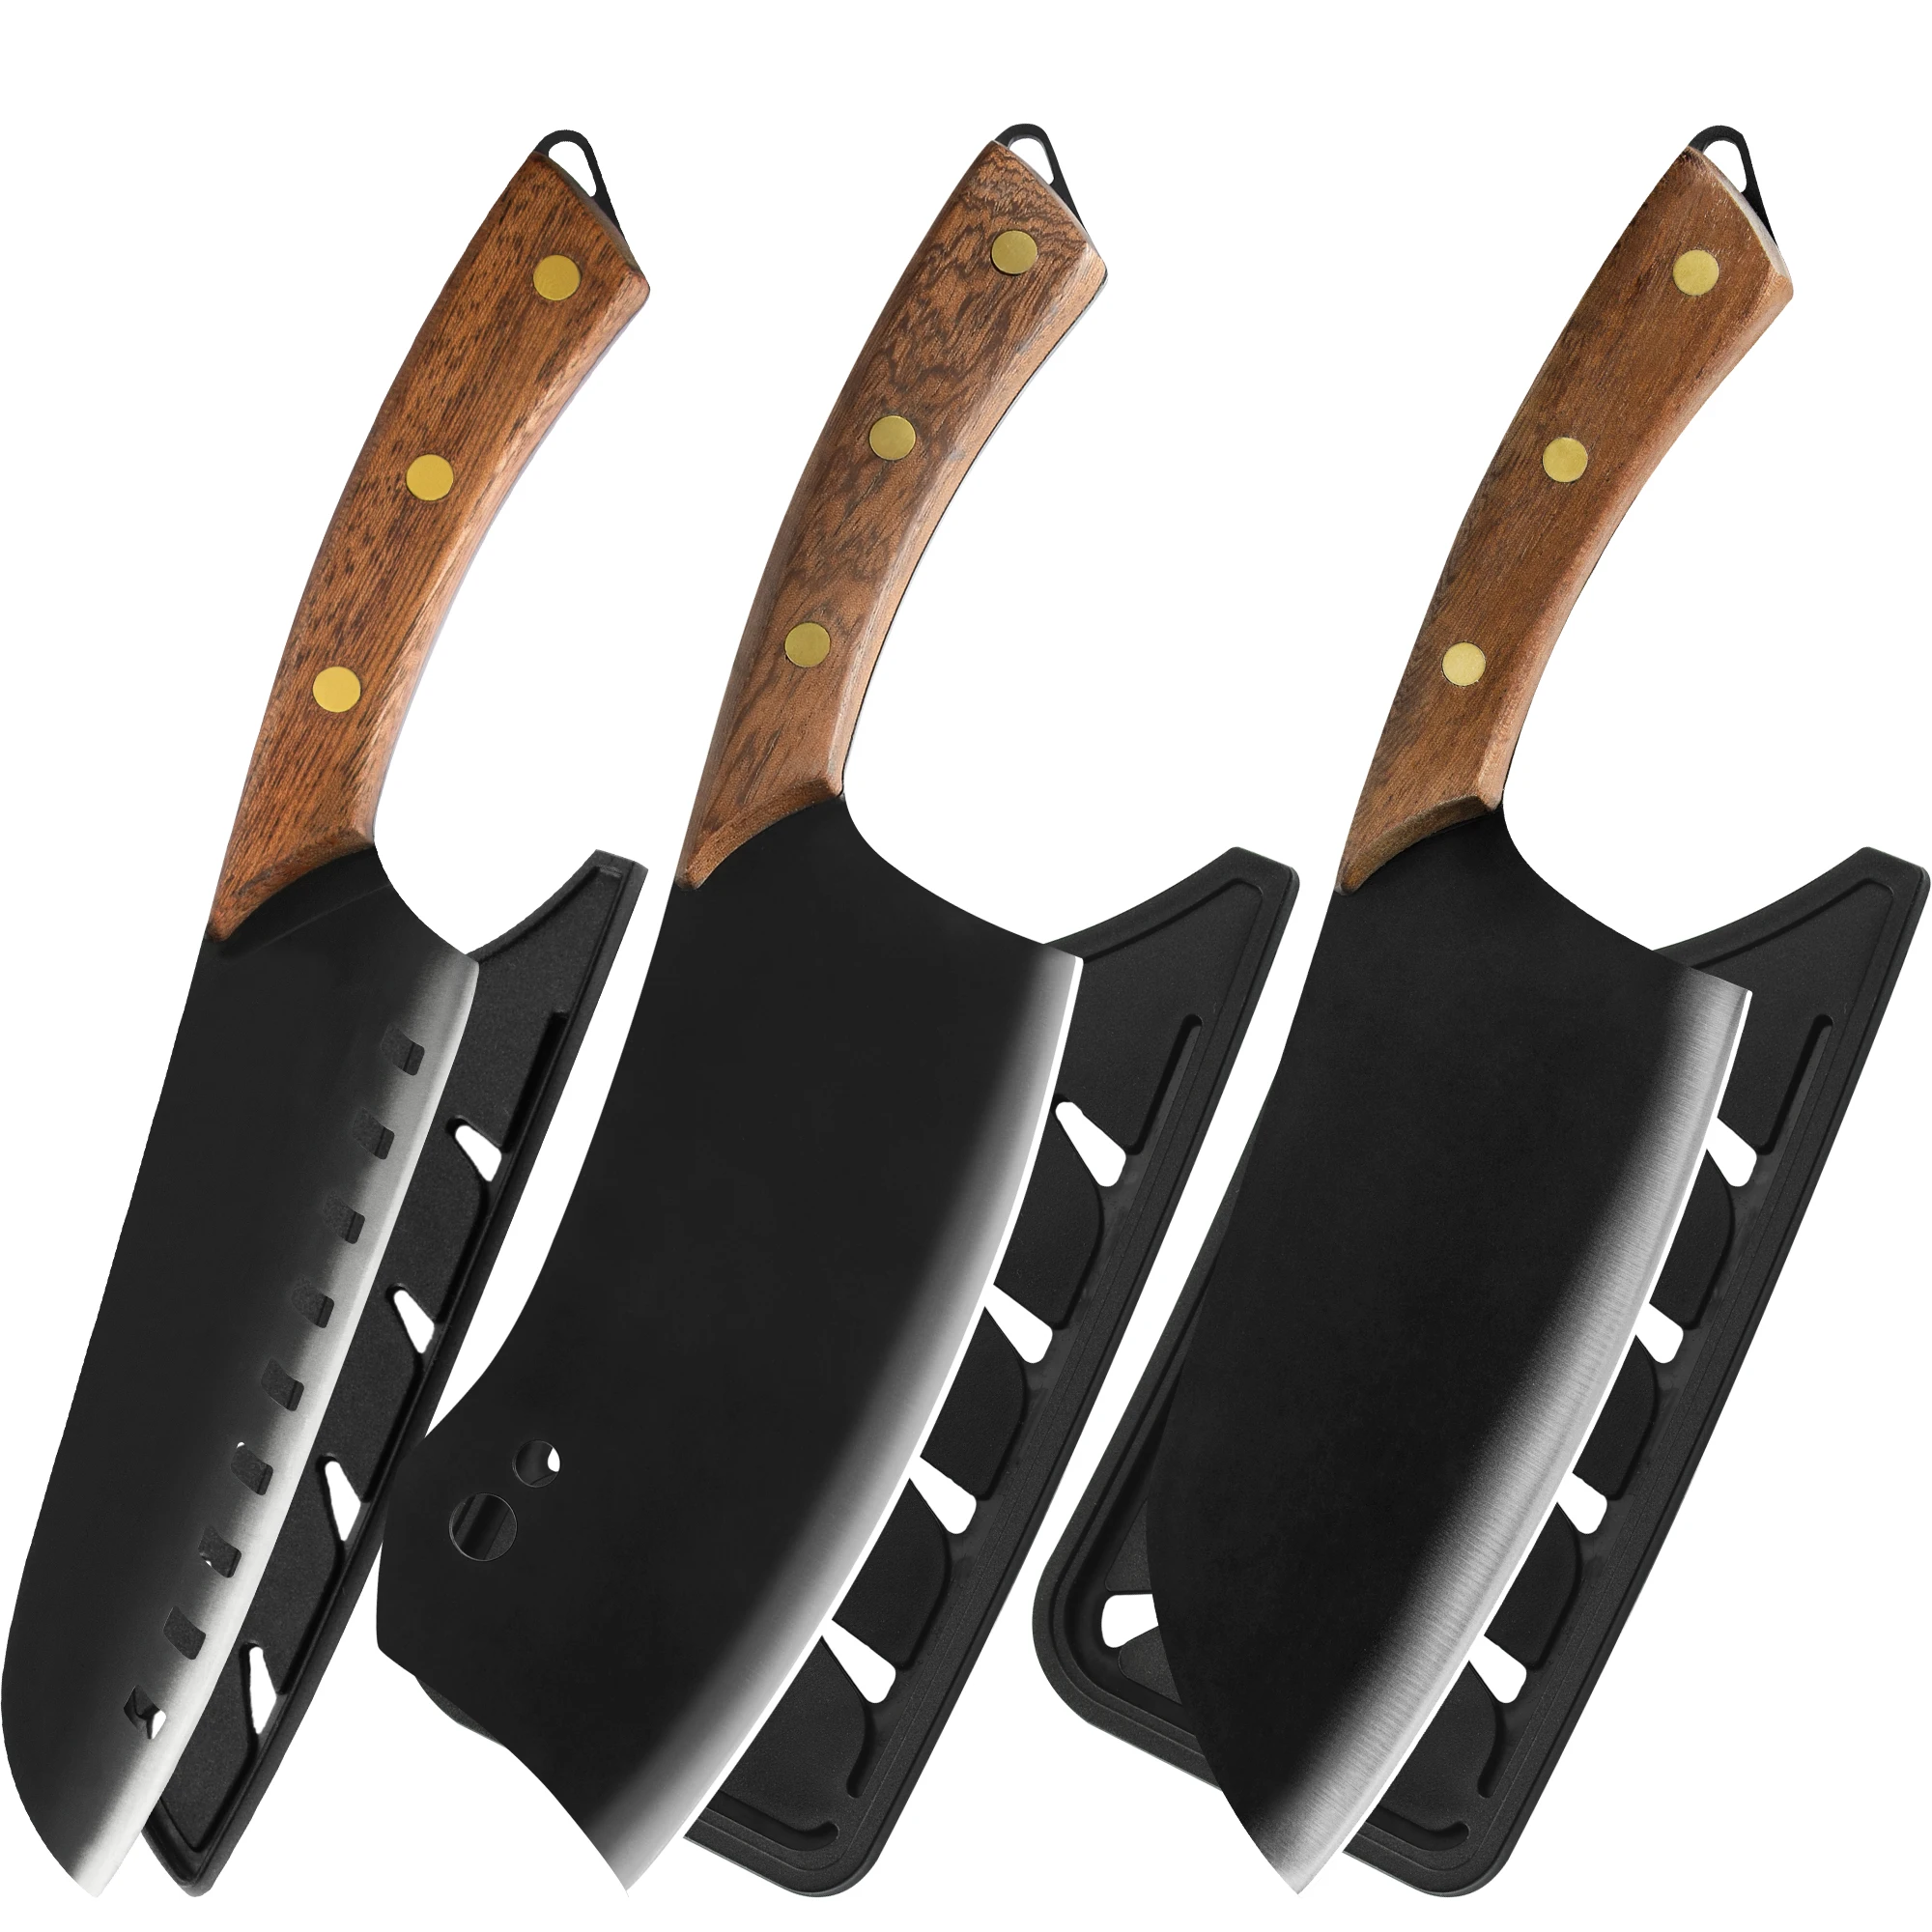 

XYj 3 Pieces Knives Set Full Tang Kitchen Cutlery Tools Stainless Steel Meat Cleaver Chopping Knives Chef Knives For Camping